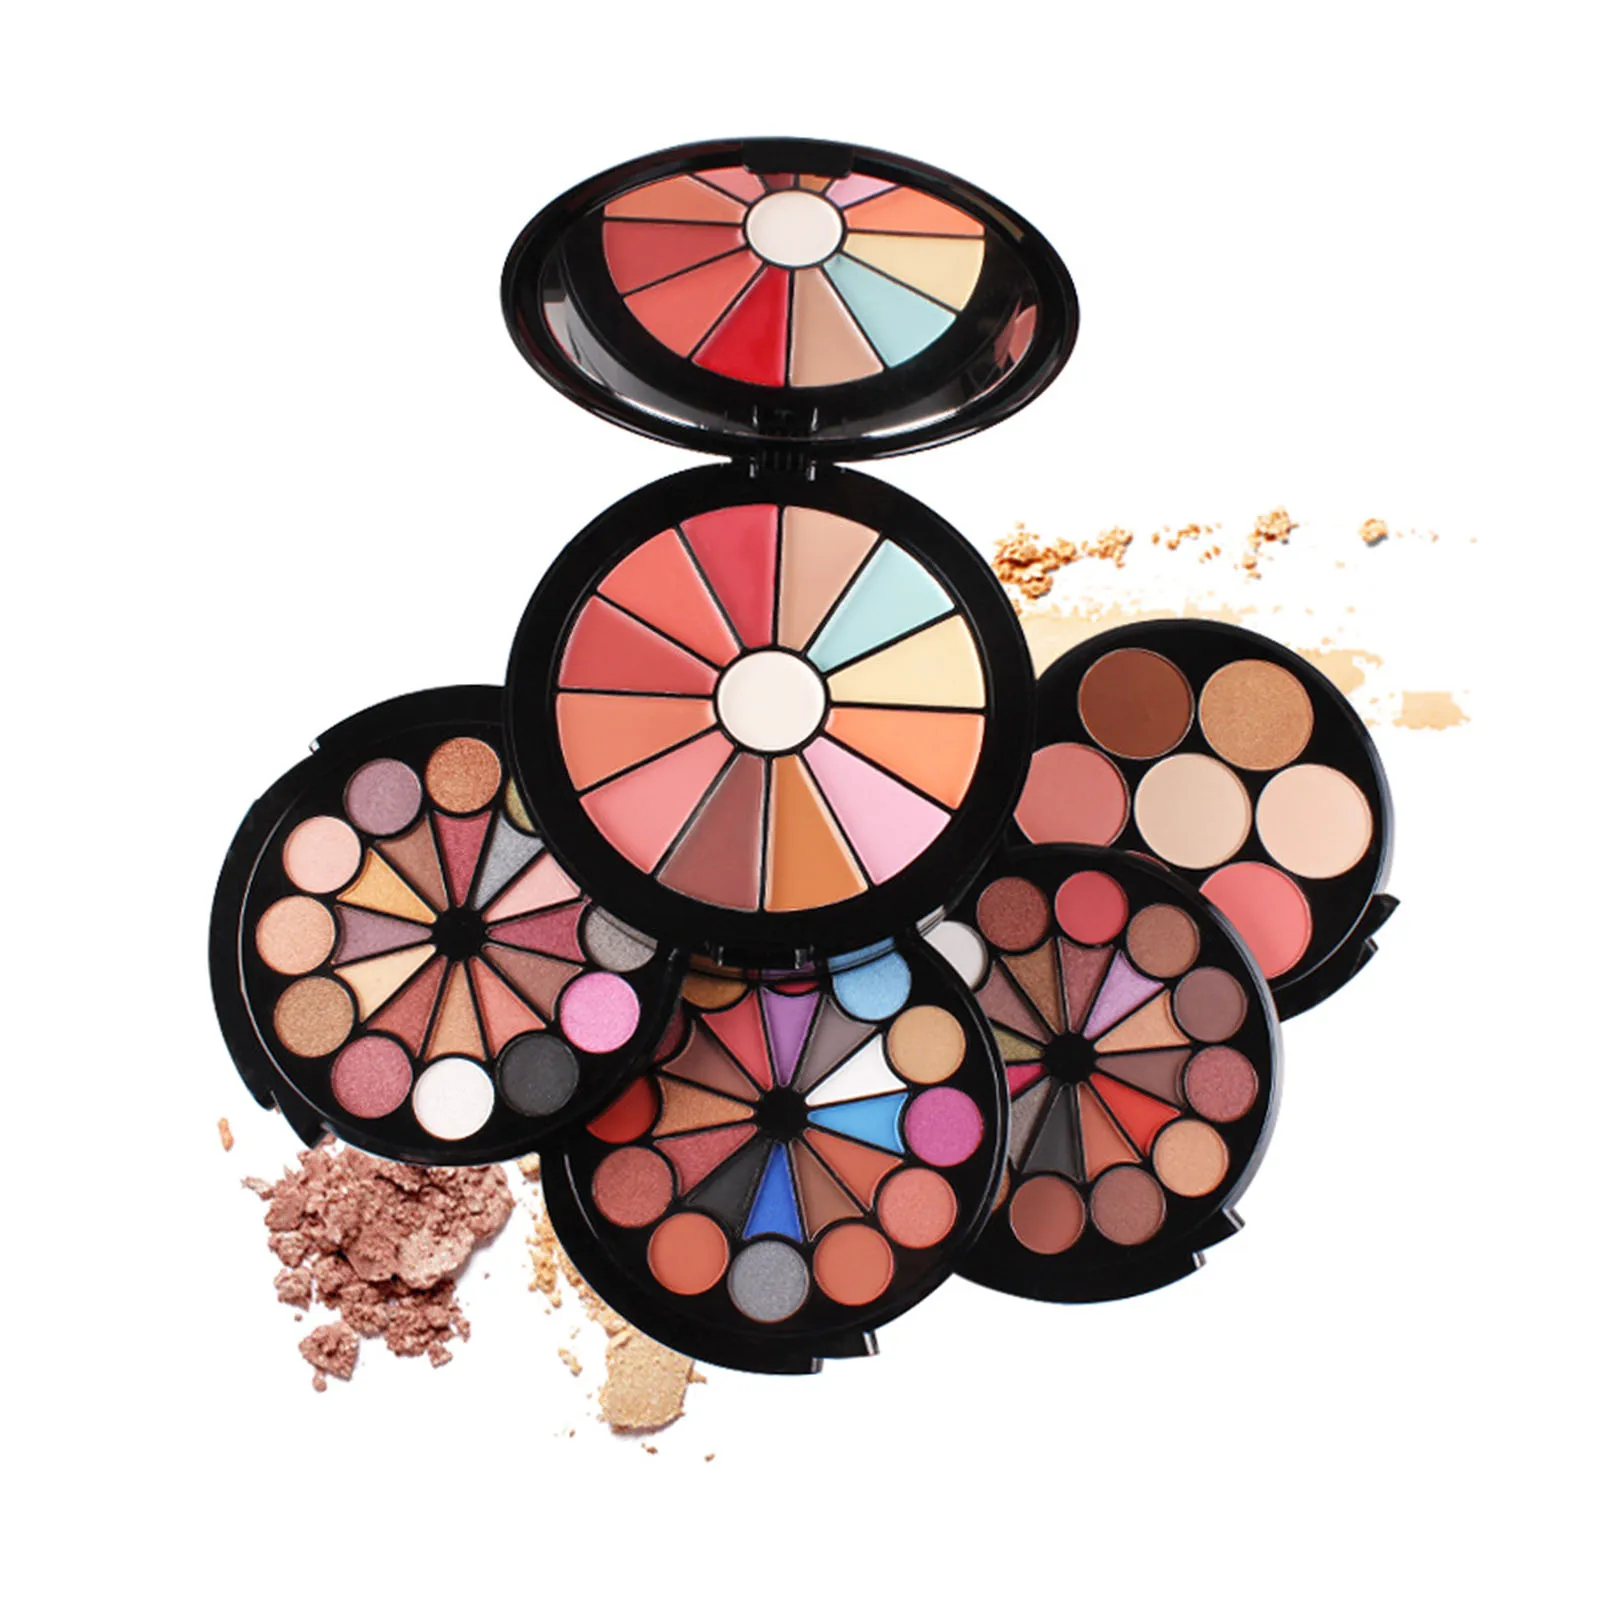 

Makeup Set 91 Colors Eyeshadow Concealer Lip Gloss Pressed Powder Highlight Contouring Blusher Makeup Kit All-in-one Makeup Pale